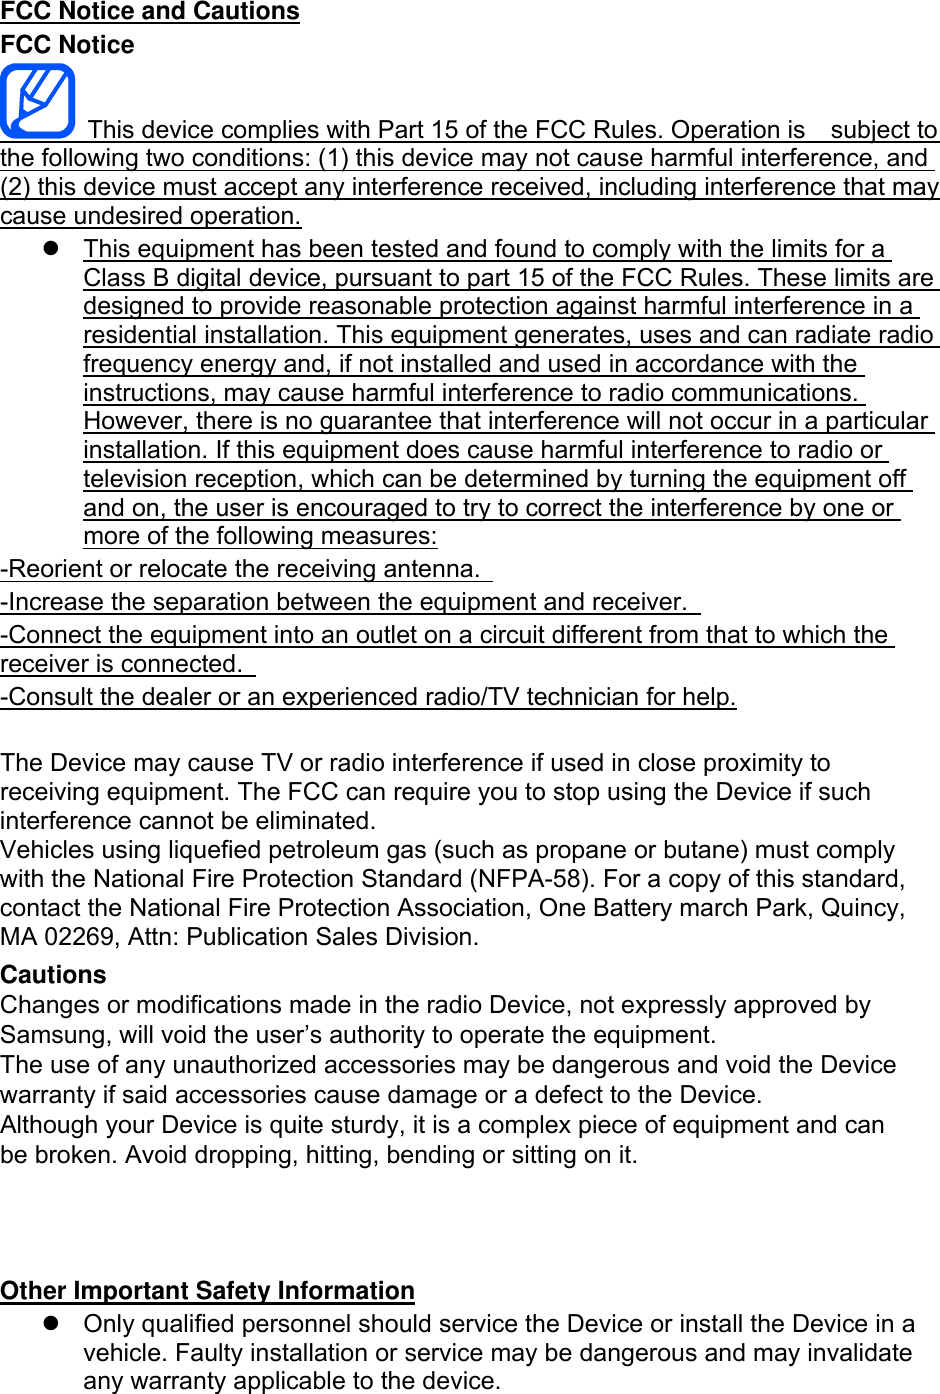 FCC Notice and Cautions FCC Notice This device complies with Part 15 of the FCC Rules. Operation is    subject to the following two conditions: (1) this device may not cause harmful interference, and (2) this device must accept any interference received, including interference that may cause undesired operation. This equipment has been tested and found to comply with the limits for aClass B digital device, pursuant to part 15 of the FCC Rules. These limits aredesigned to provide reasonable protection against harmful interference in aresidential installation. This equipment generates, uses and can radiate radiofrequency energy and, if not installed and used in accordance with theinstructions, may cause harmful interference to radio communications.However, there is no guarantee that interference will not occur in a particularinstallation. If this equipment does cause harmful interference to radio ortelevision reception, which can be determined by turning the equipment offand on, the user is encouraged to try to correct the interference by one ormore of the following measures:-Reorient or relocate the receiving antenna.   -Increase the separation between the equipment and receiver.   -Connect the equipment into an outlet on a circuit different from that to which the receiver is connected.   -Consult the dealer or an experienced radio/TV technician for help. The Device may cause TV or radio interference if used in close proximity to receiving equipment. The FCC can require you to stop using the Device if such interference cannot be eliminated. Vehicles using liquefied petroleum gas (such as propane or butane) must comply with the National Fire Protection Standard (NFPA-58). For a copy of this standard, contact the National Fire Protection Association, One Battery march Park, Quincy, MA 02269, Attn: Publication Sales Division. Cautions Changes or modifications made in the radio Device, not expressly approved by Samsung, will void the user’s authority to operate the equipment. The use of any unauthorized accessories may be dangerous and void the Device warranty if said accessories cause damage or a defect to the Device. Although your Device is quite sturdy, it is a complex piece of equipment and can be broken. Avoid dropping, hitting, bending or sitting on it. Other Important Safety Information Only qualified personnel should service the Device or install the Device in avehicle. Faulty installation or service may be dangerous and may invalidateany warranty applicable to the device.